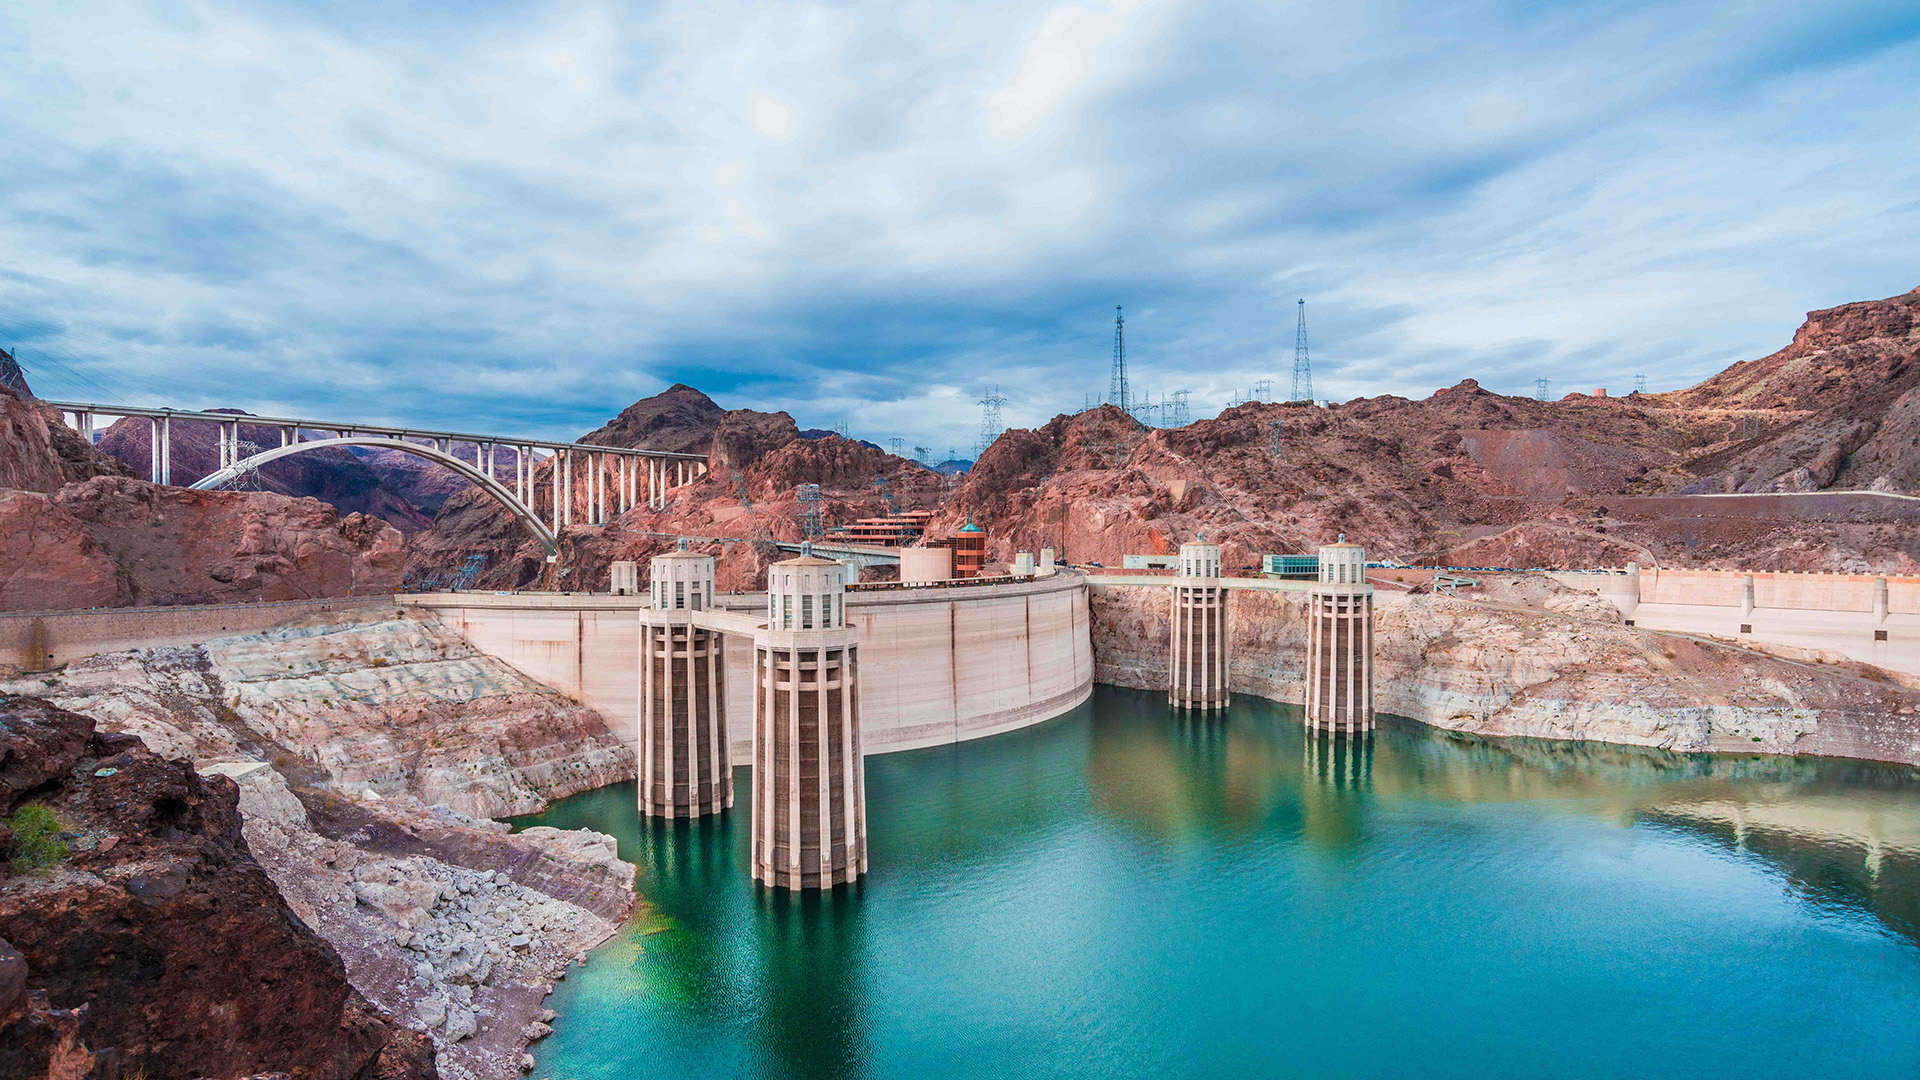 View of the Hoover Dam in Nevada, USA Consumer Energy Alliance